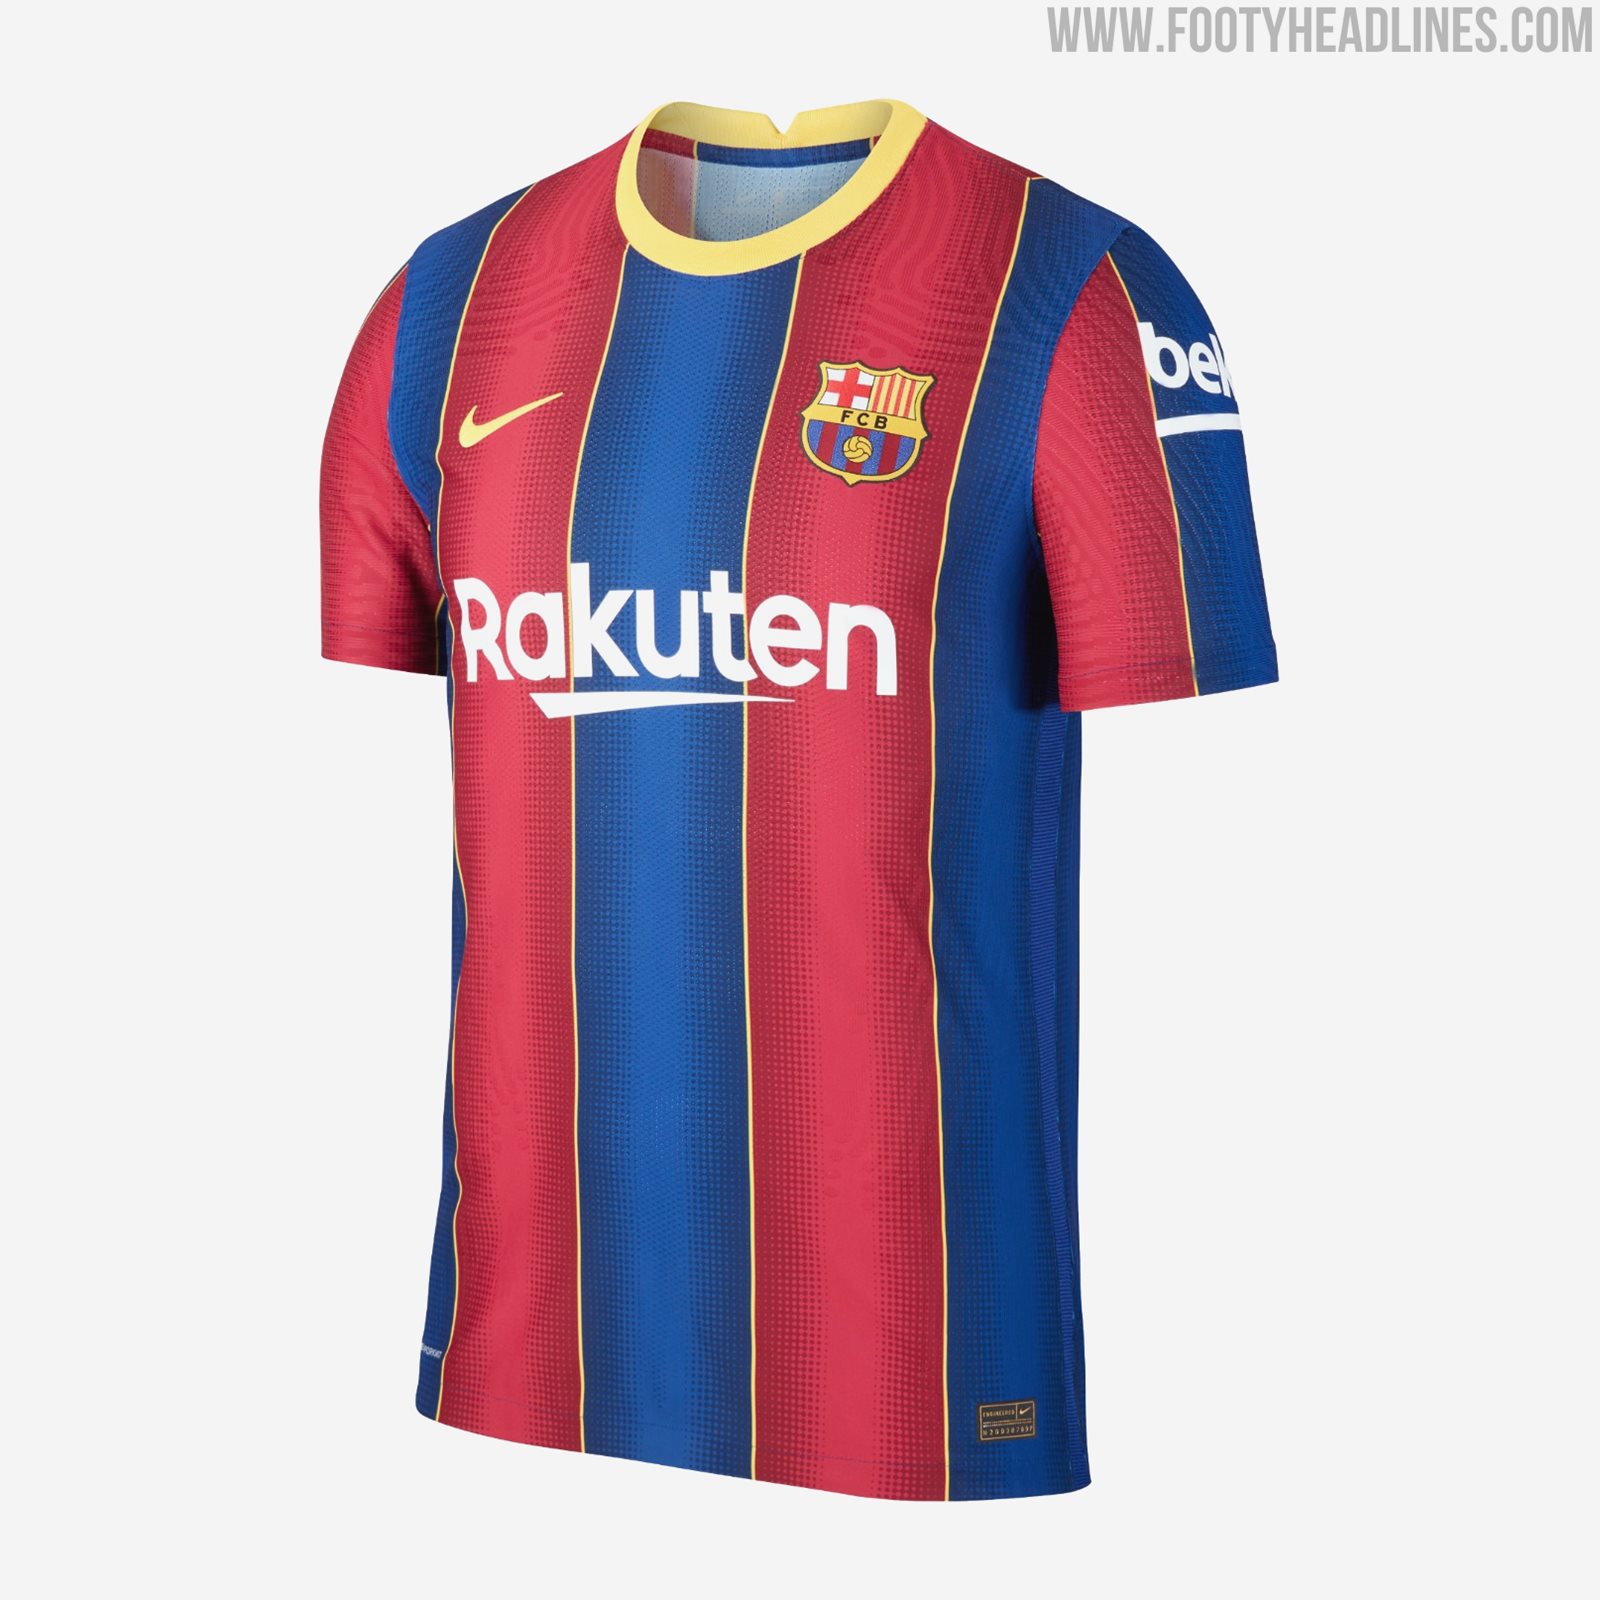 FC Barcelona 21-22 Home Kit Leaked + Away & Third Kits Info - Round Up